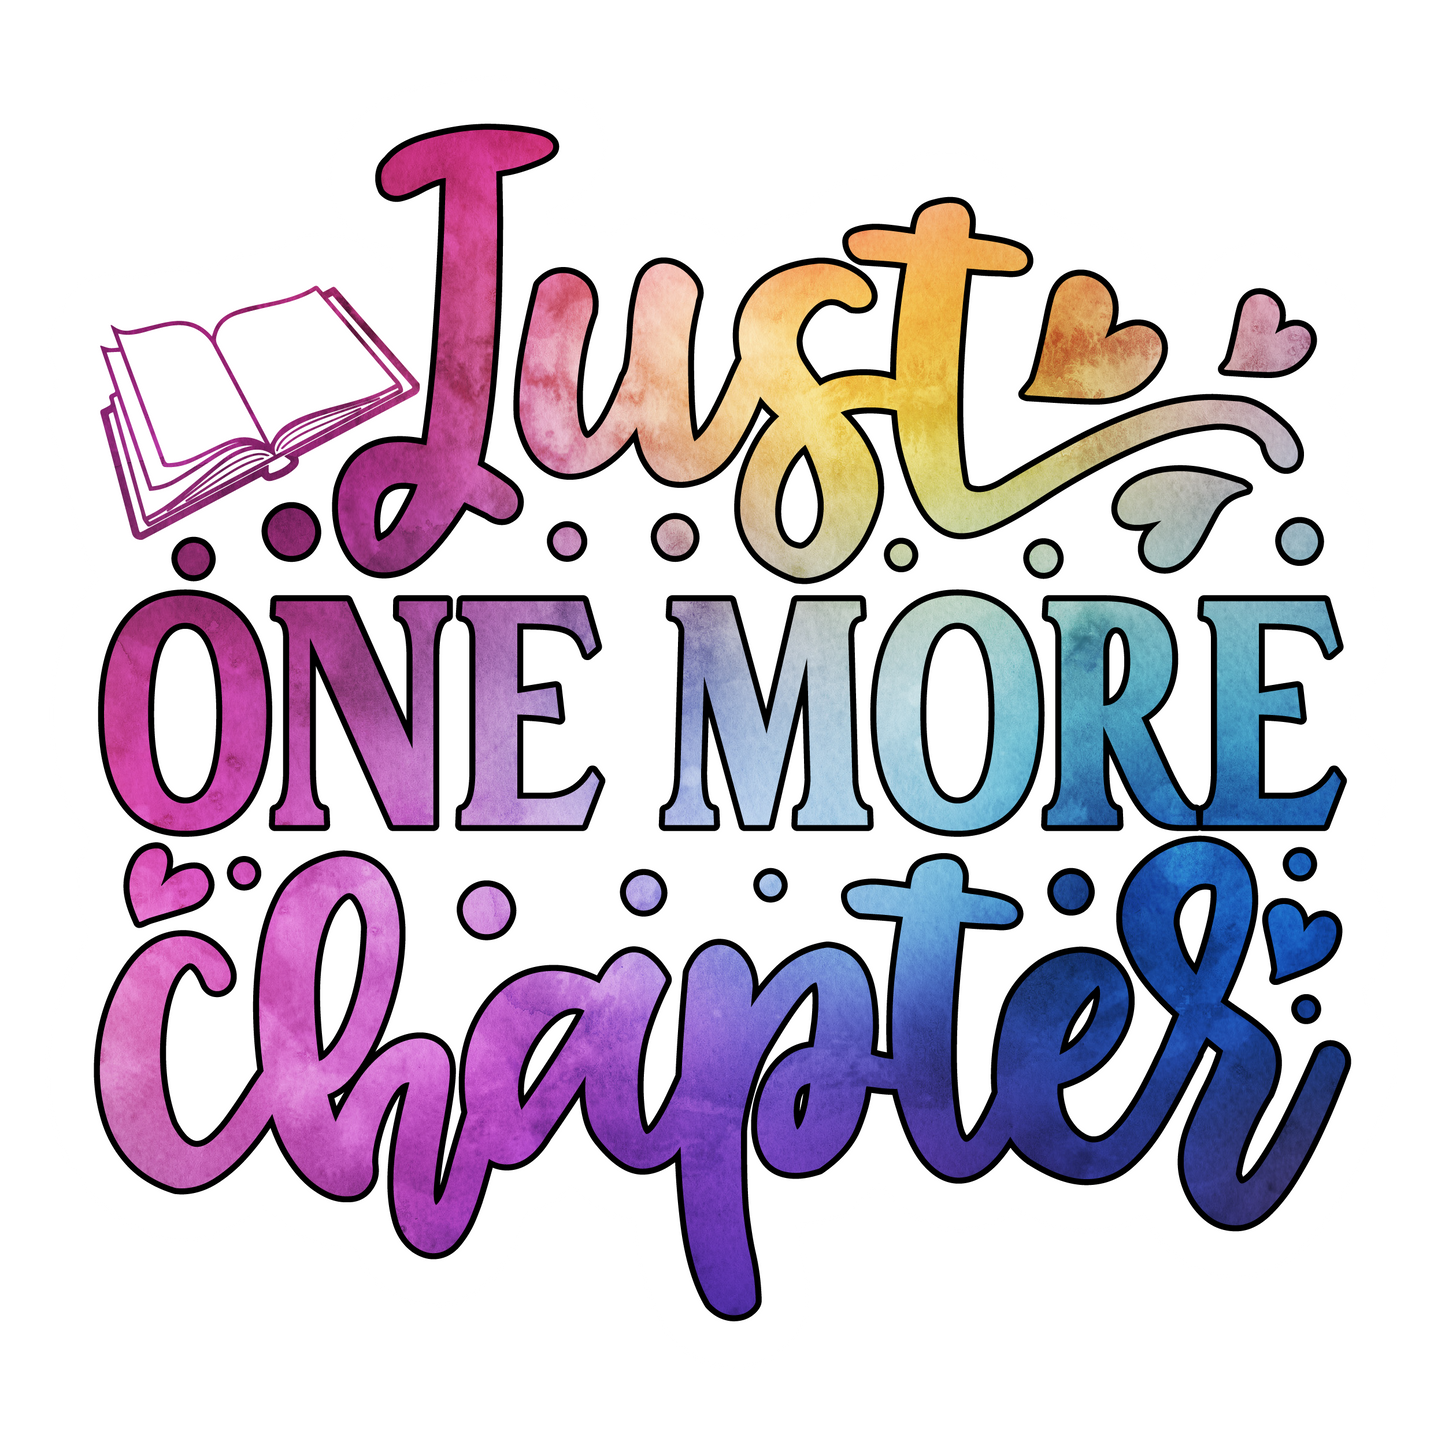 Stickers - Just One More Chapter Sticker,  Book Lovers' Sticker